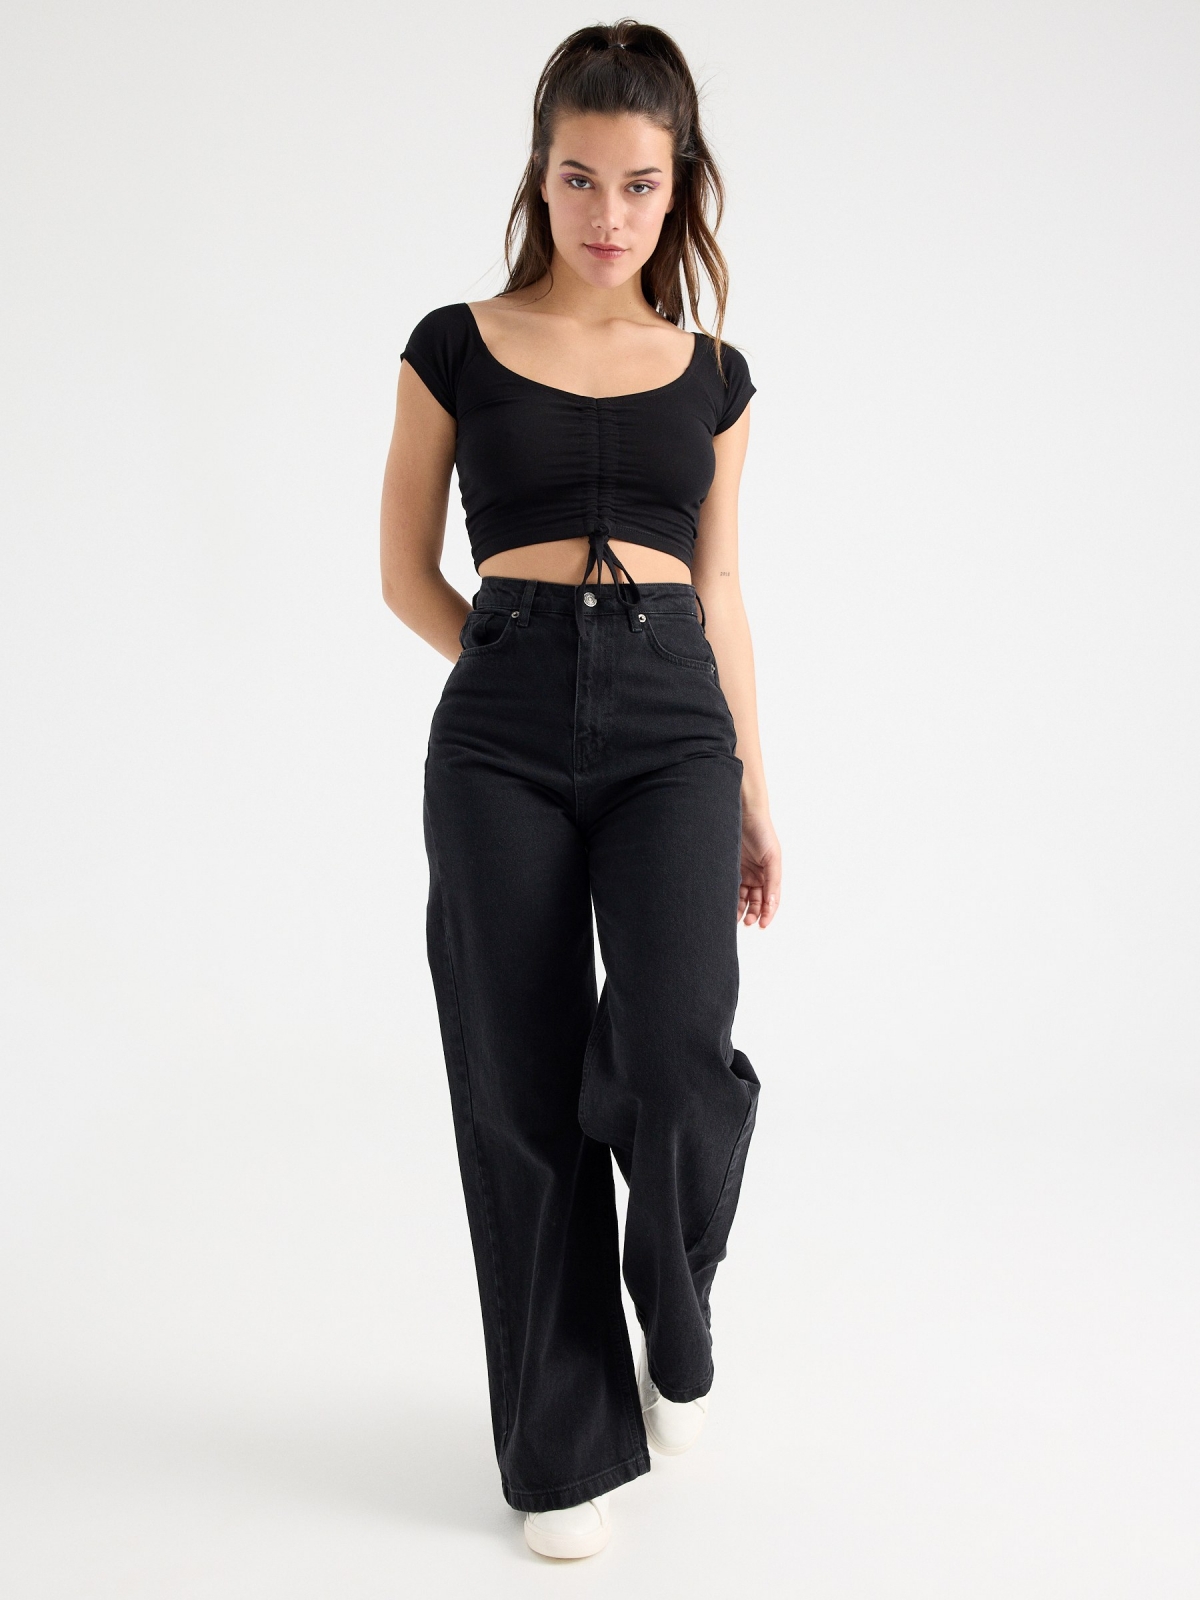 Ruched cropped t-shirt black front view